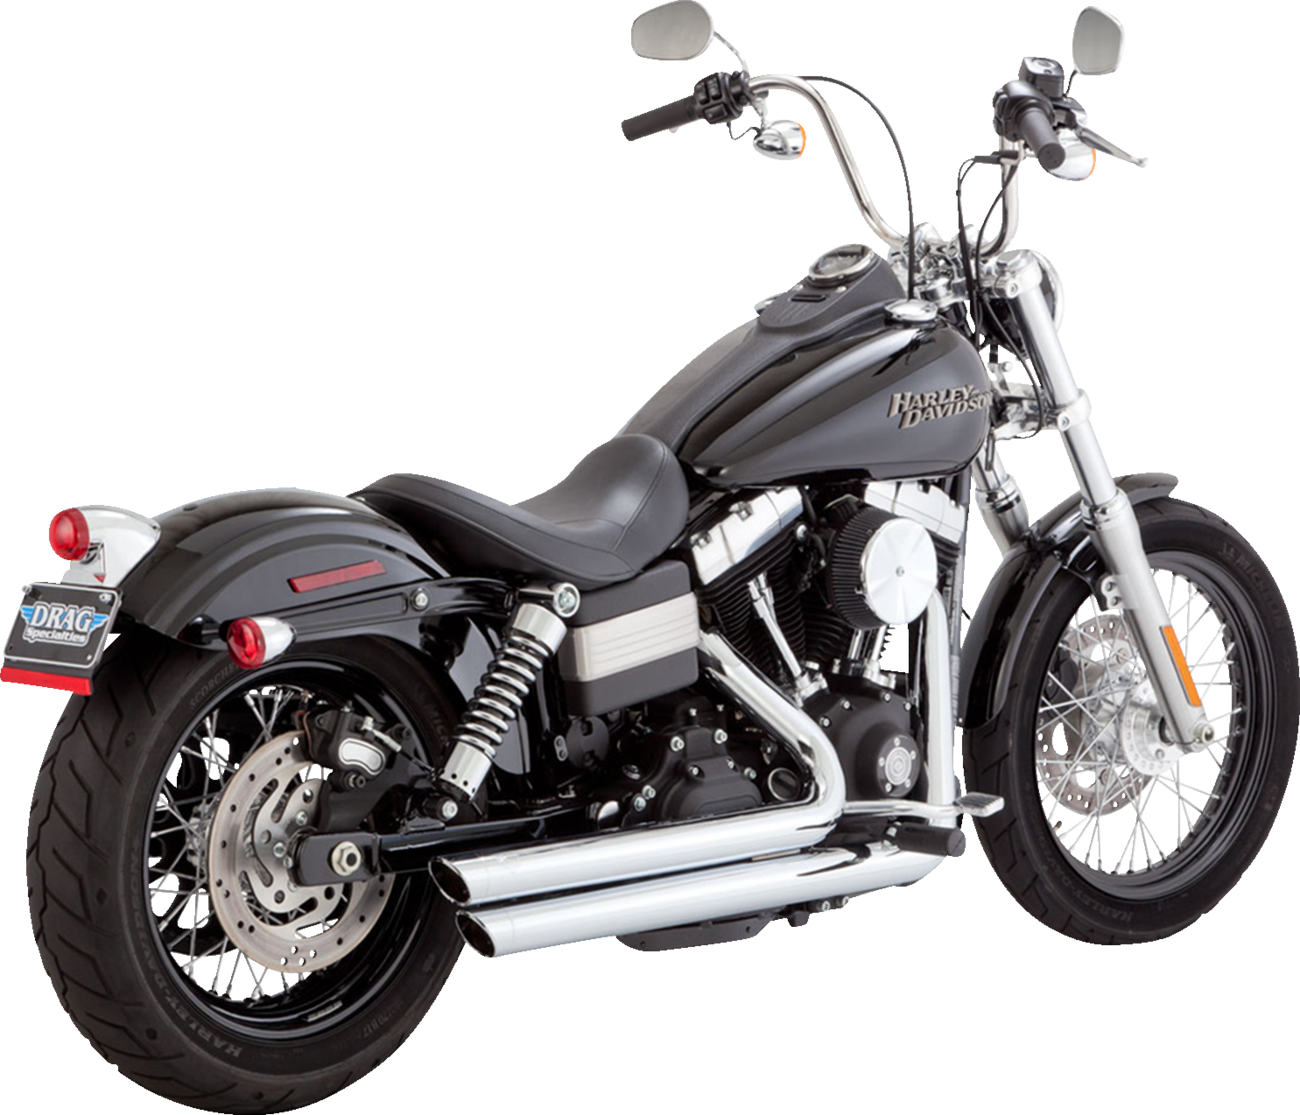 Vance & Hines Big Shot Staggered Chrome Exhaust System for 2006-2009 Harley Dyna